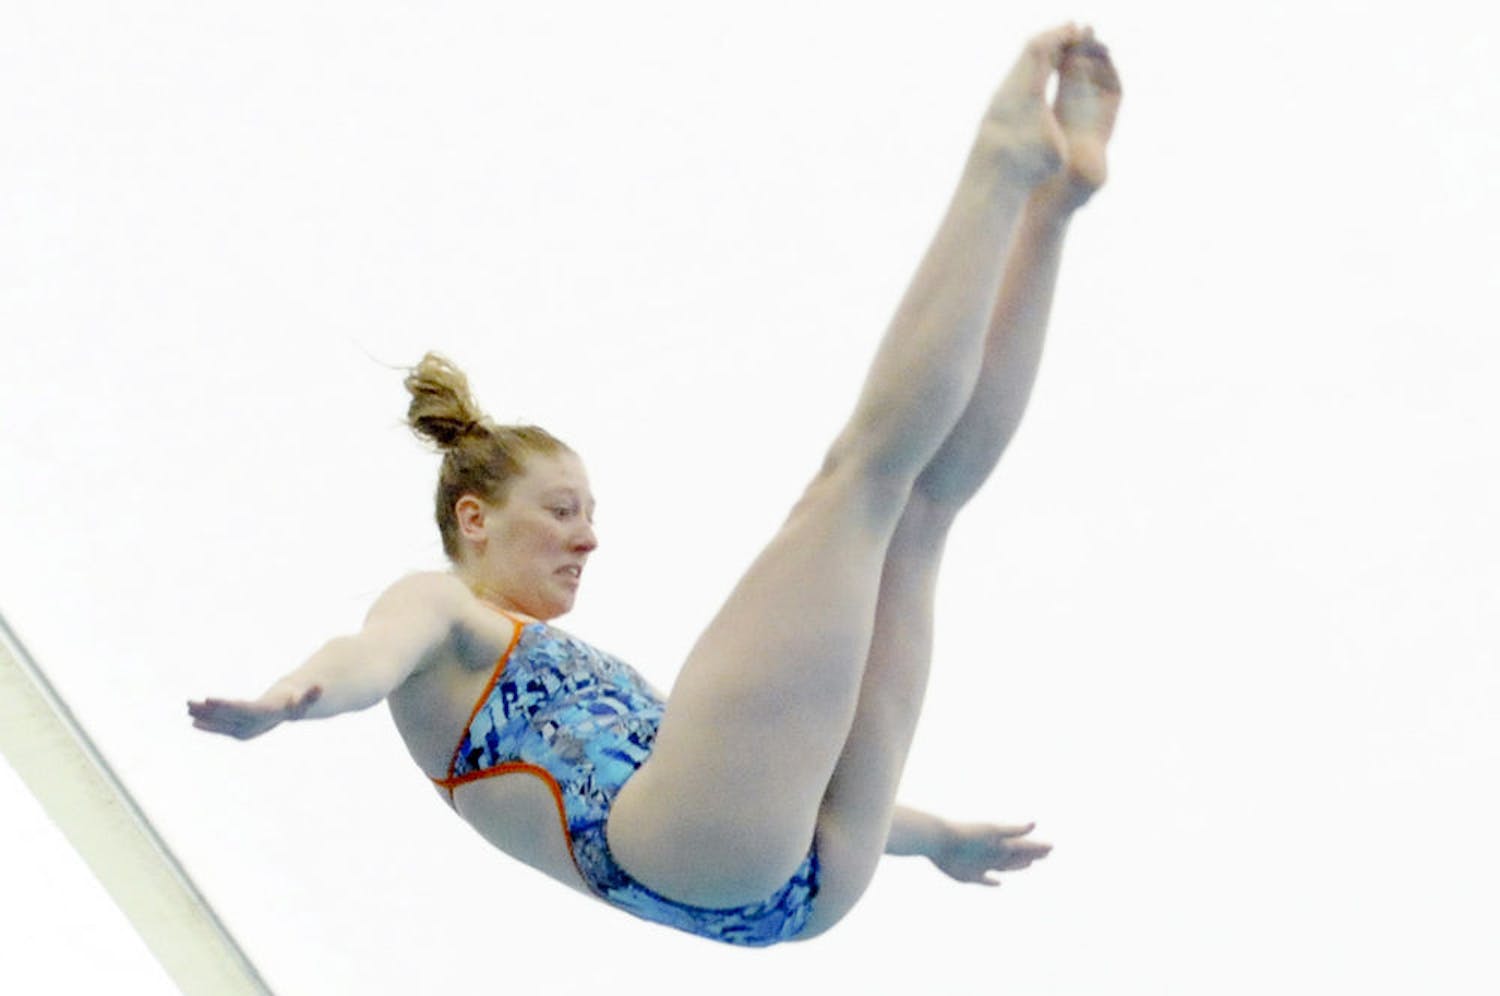 Khalia Warner dives during Florida’s meet against Auburn on Jan. 23, 2016, in the O’Connell Center.